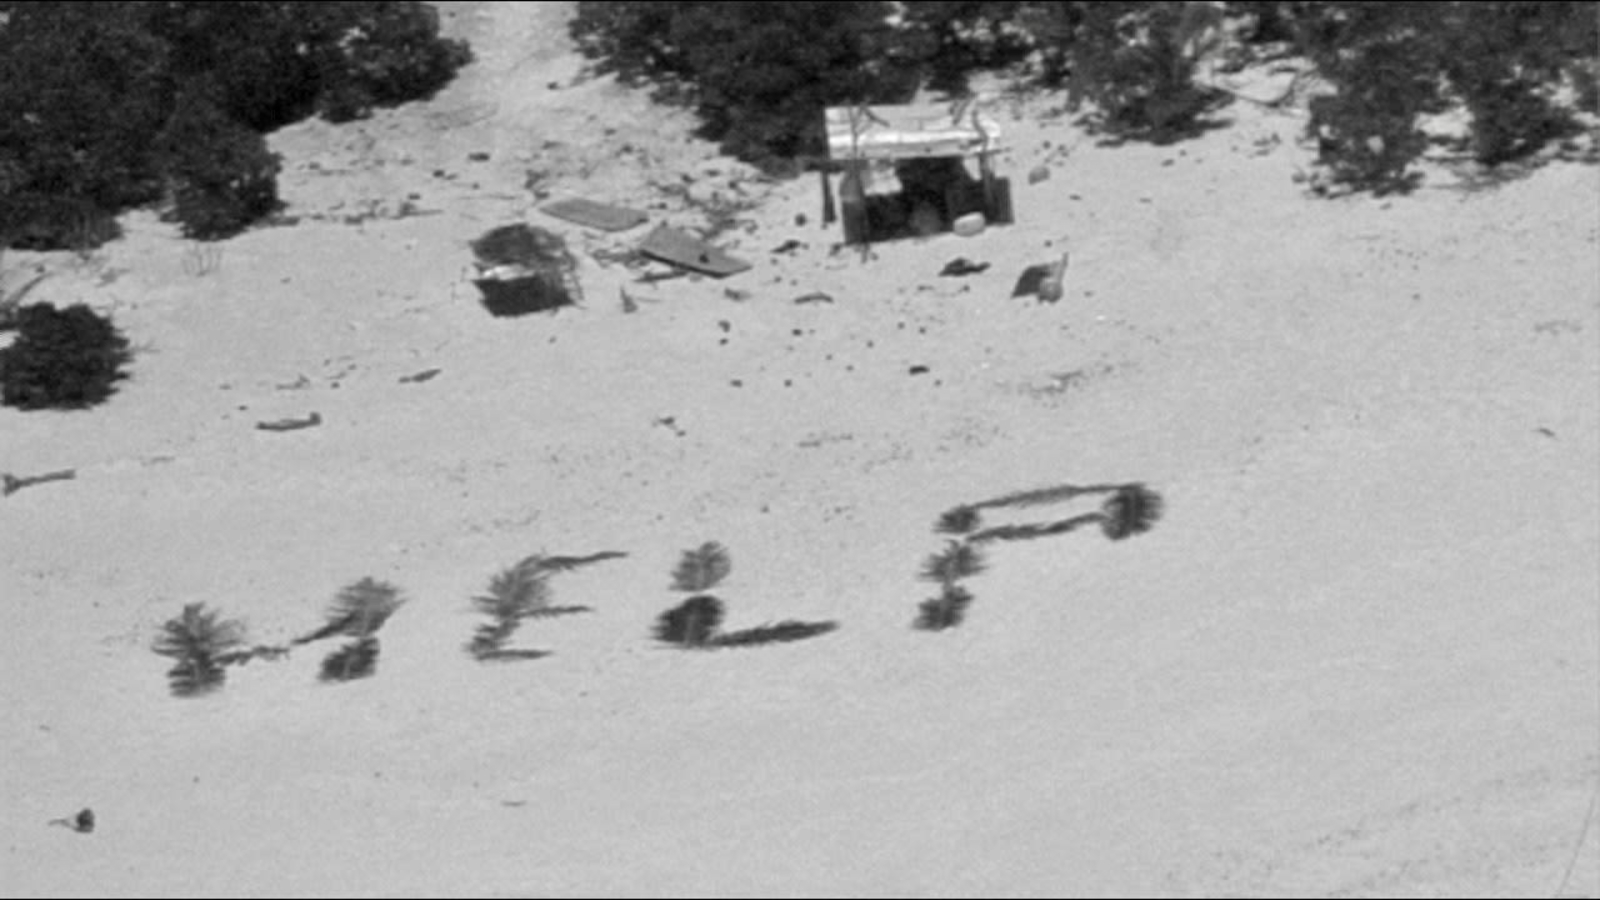 Pacific castaways’ ‘HELP’ sign sparks US rescue mission from Pikelot Atoll in Micronesia [Video]